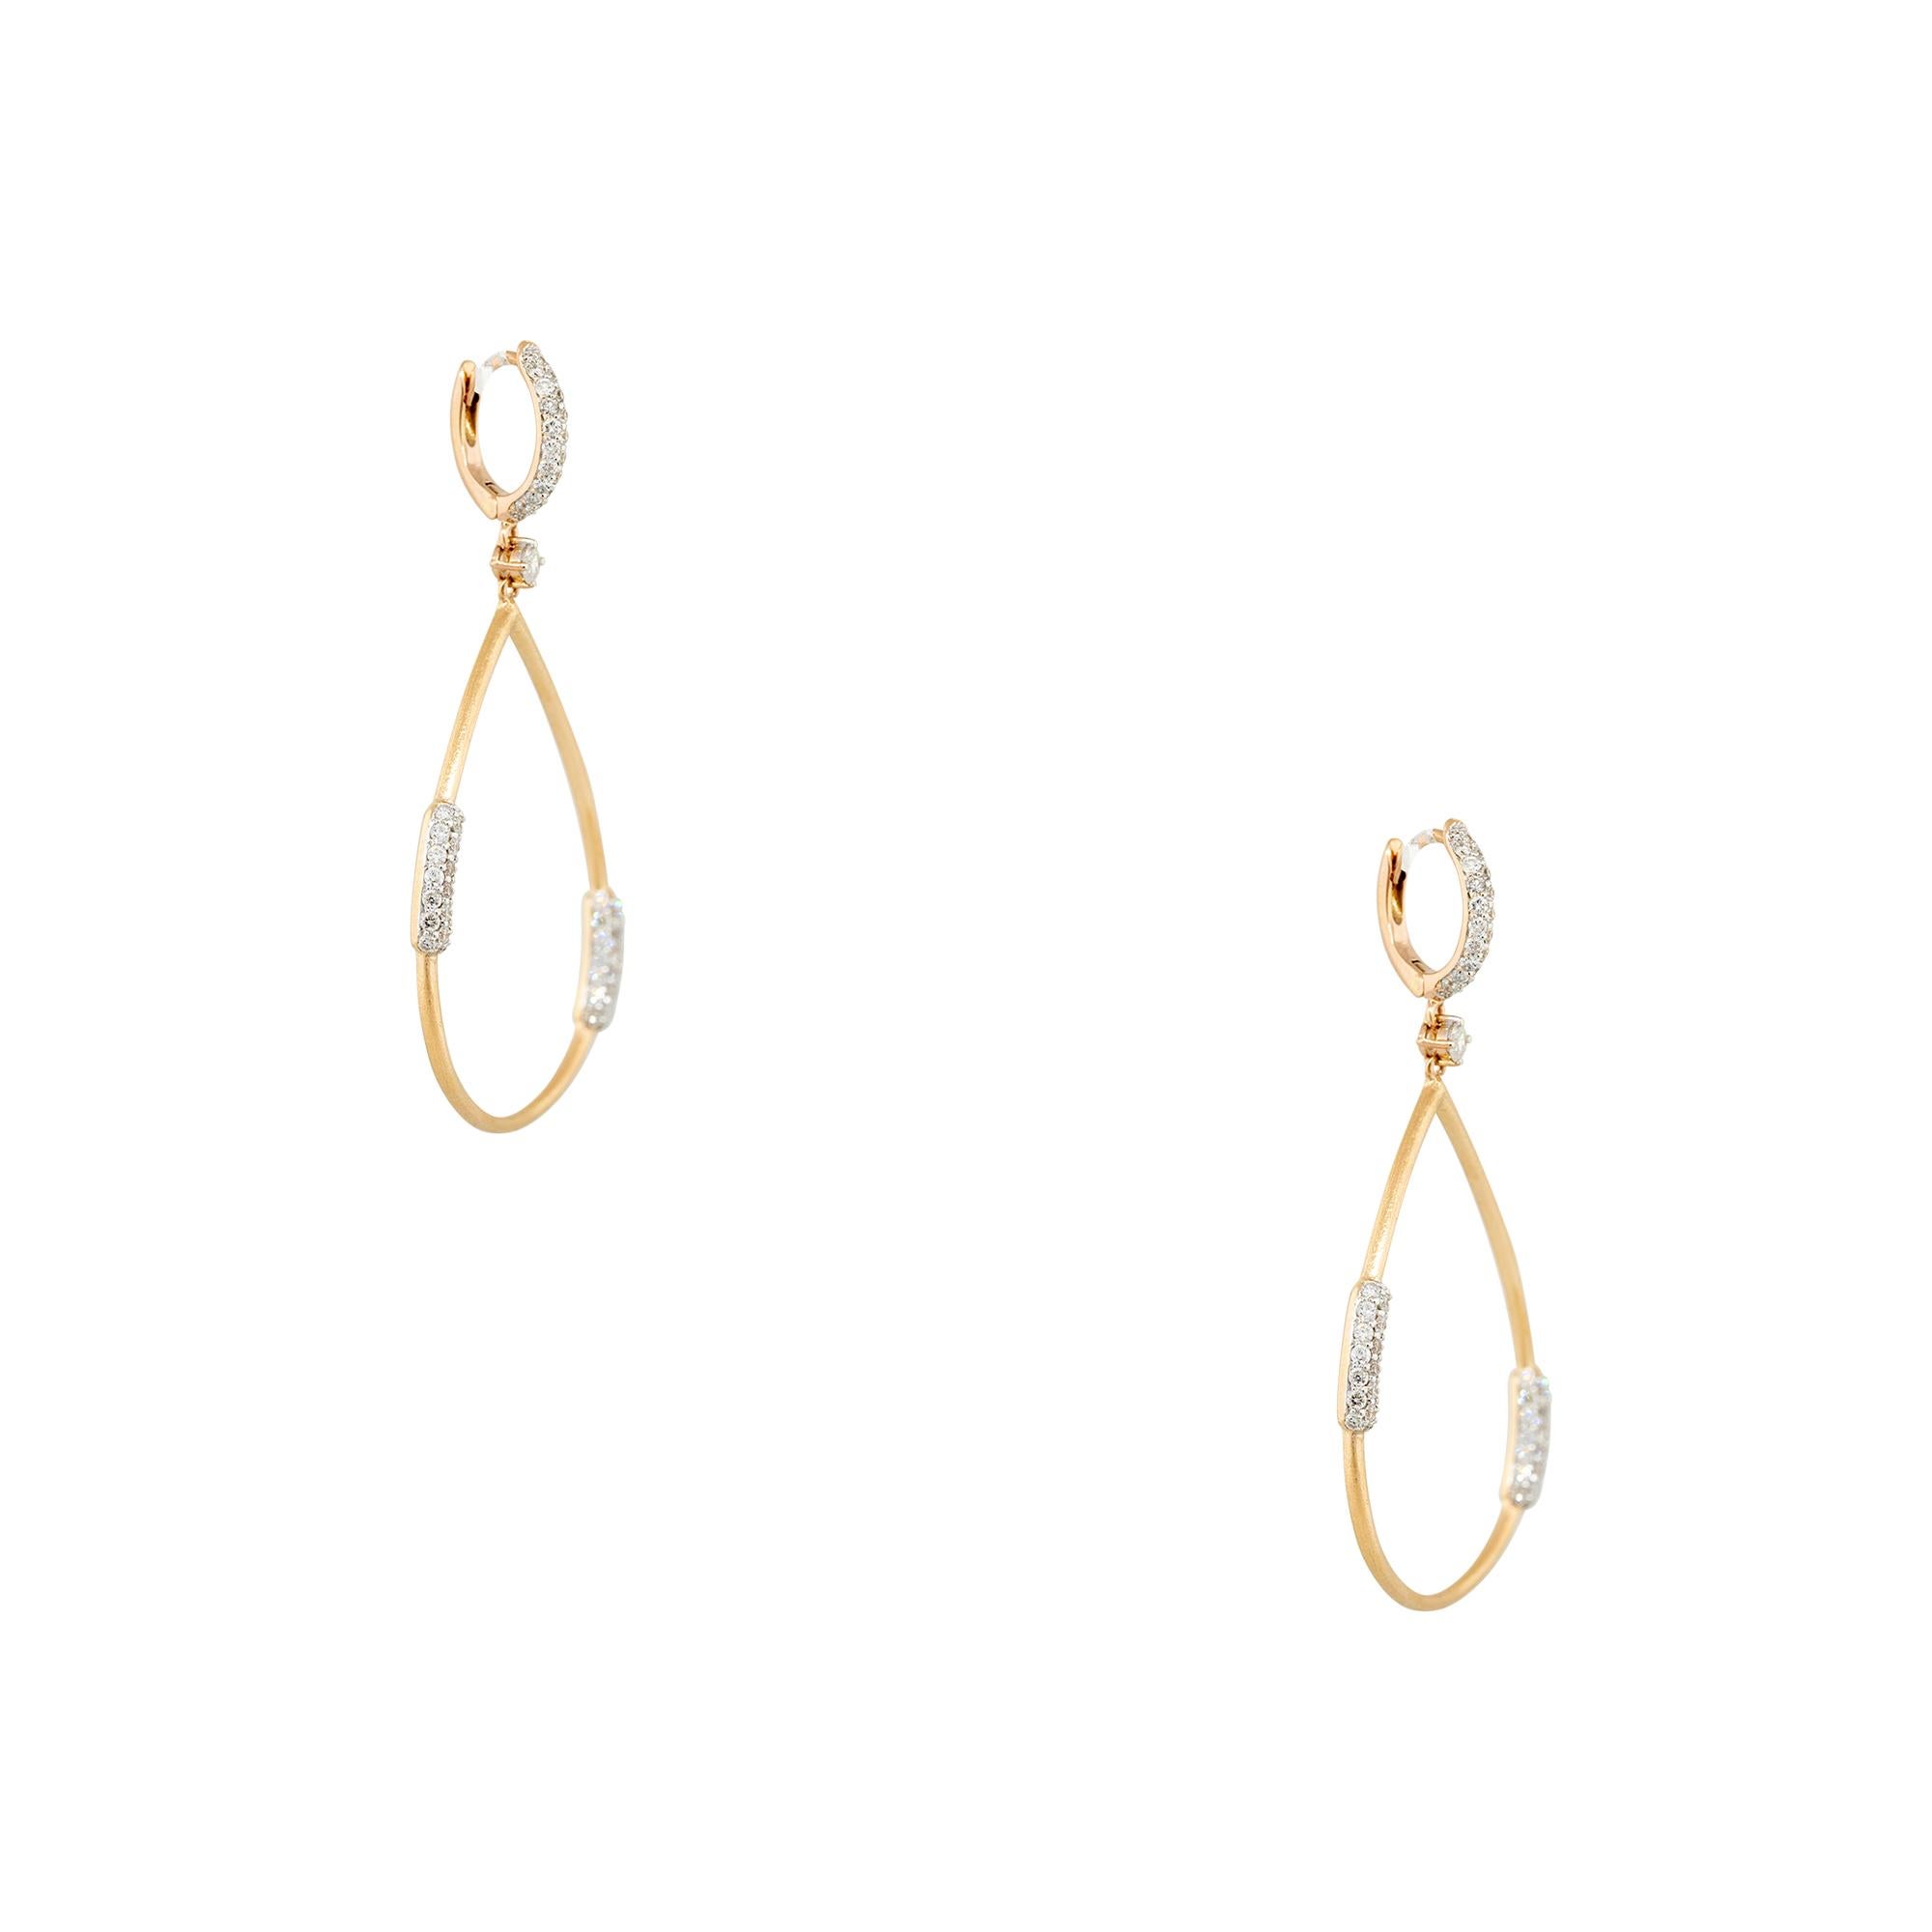 18k Rose Gold 0.63ctw Pave Diamond Tear Drop Earrings
Material: 18k Rose Gold
Diamond Details: All diamonds are approximately 0.63ctw of Pave set Round Brilliant Diamonds. Diamonds are approximately G/H in color and approximately SI in